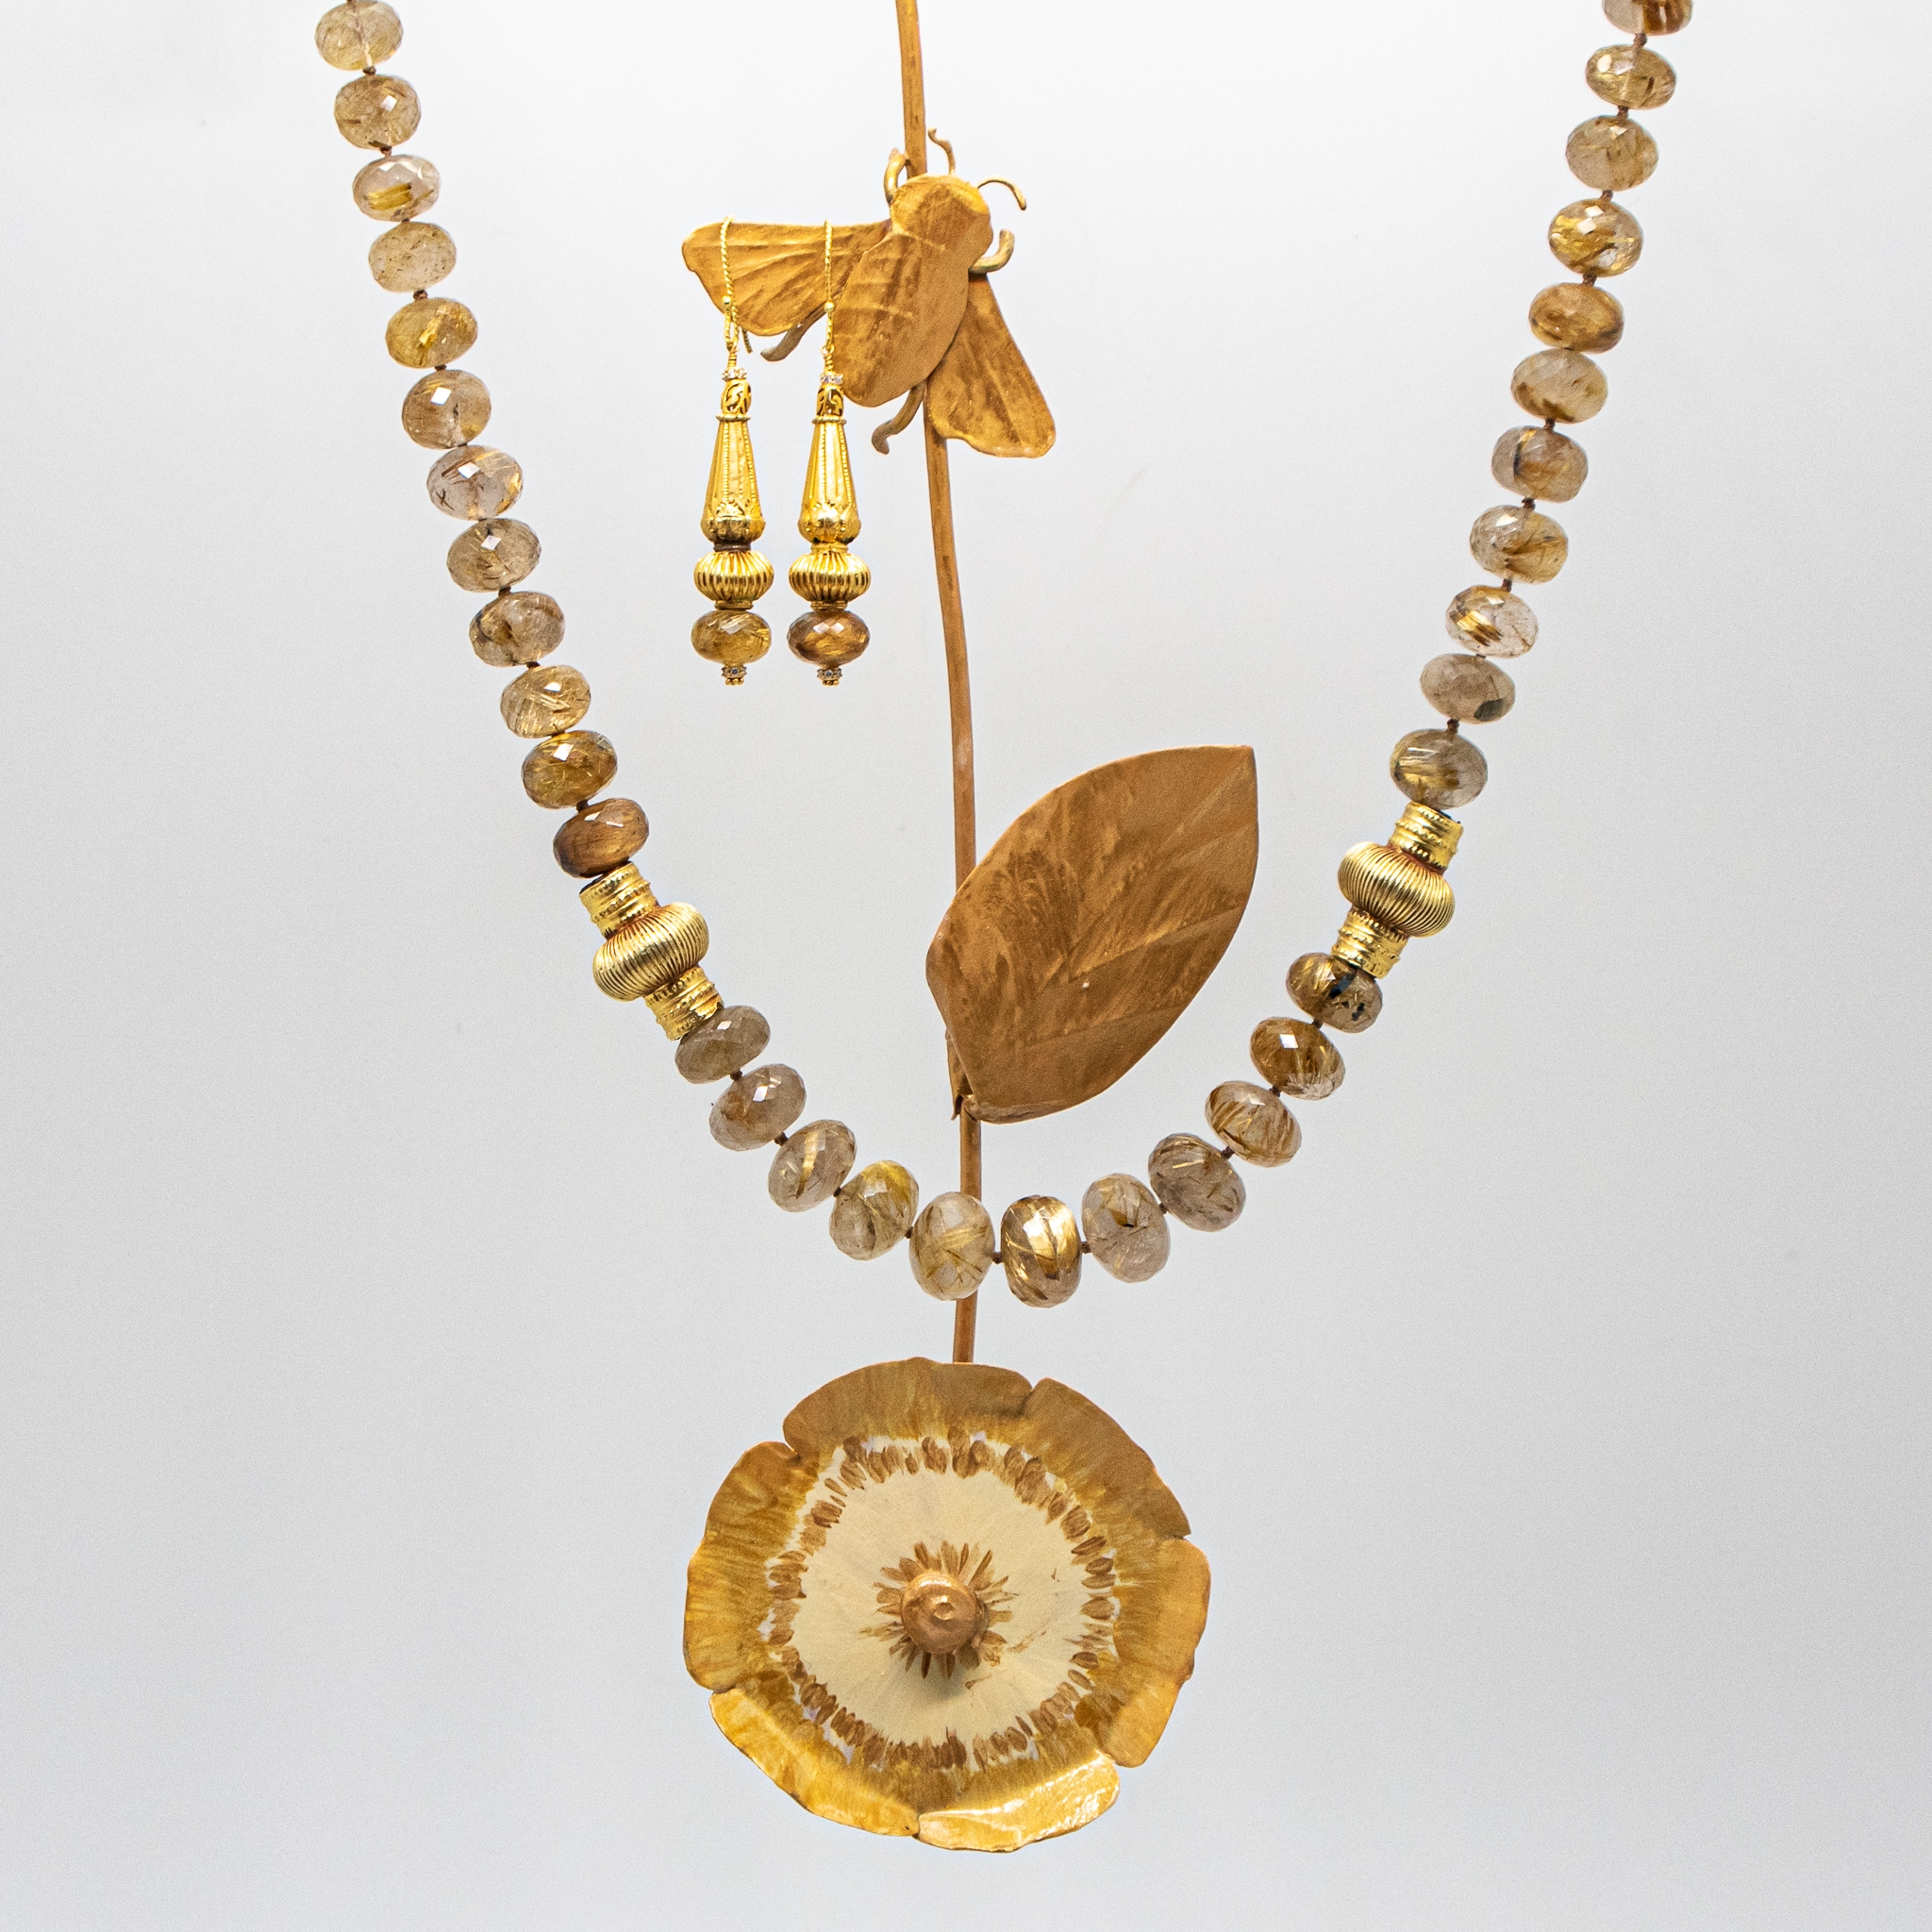 Rutilated Quartz necklace with matching earrings shown with handmade metal flower and moth